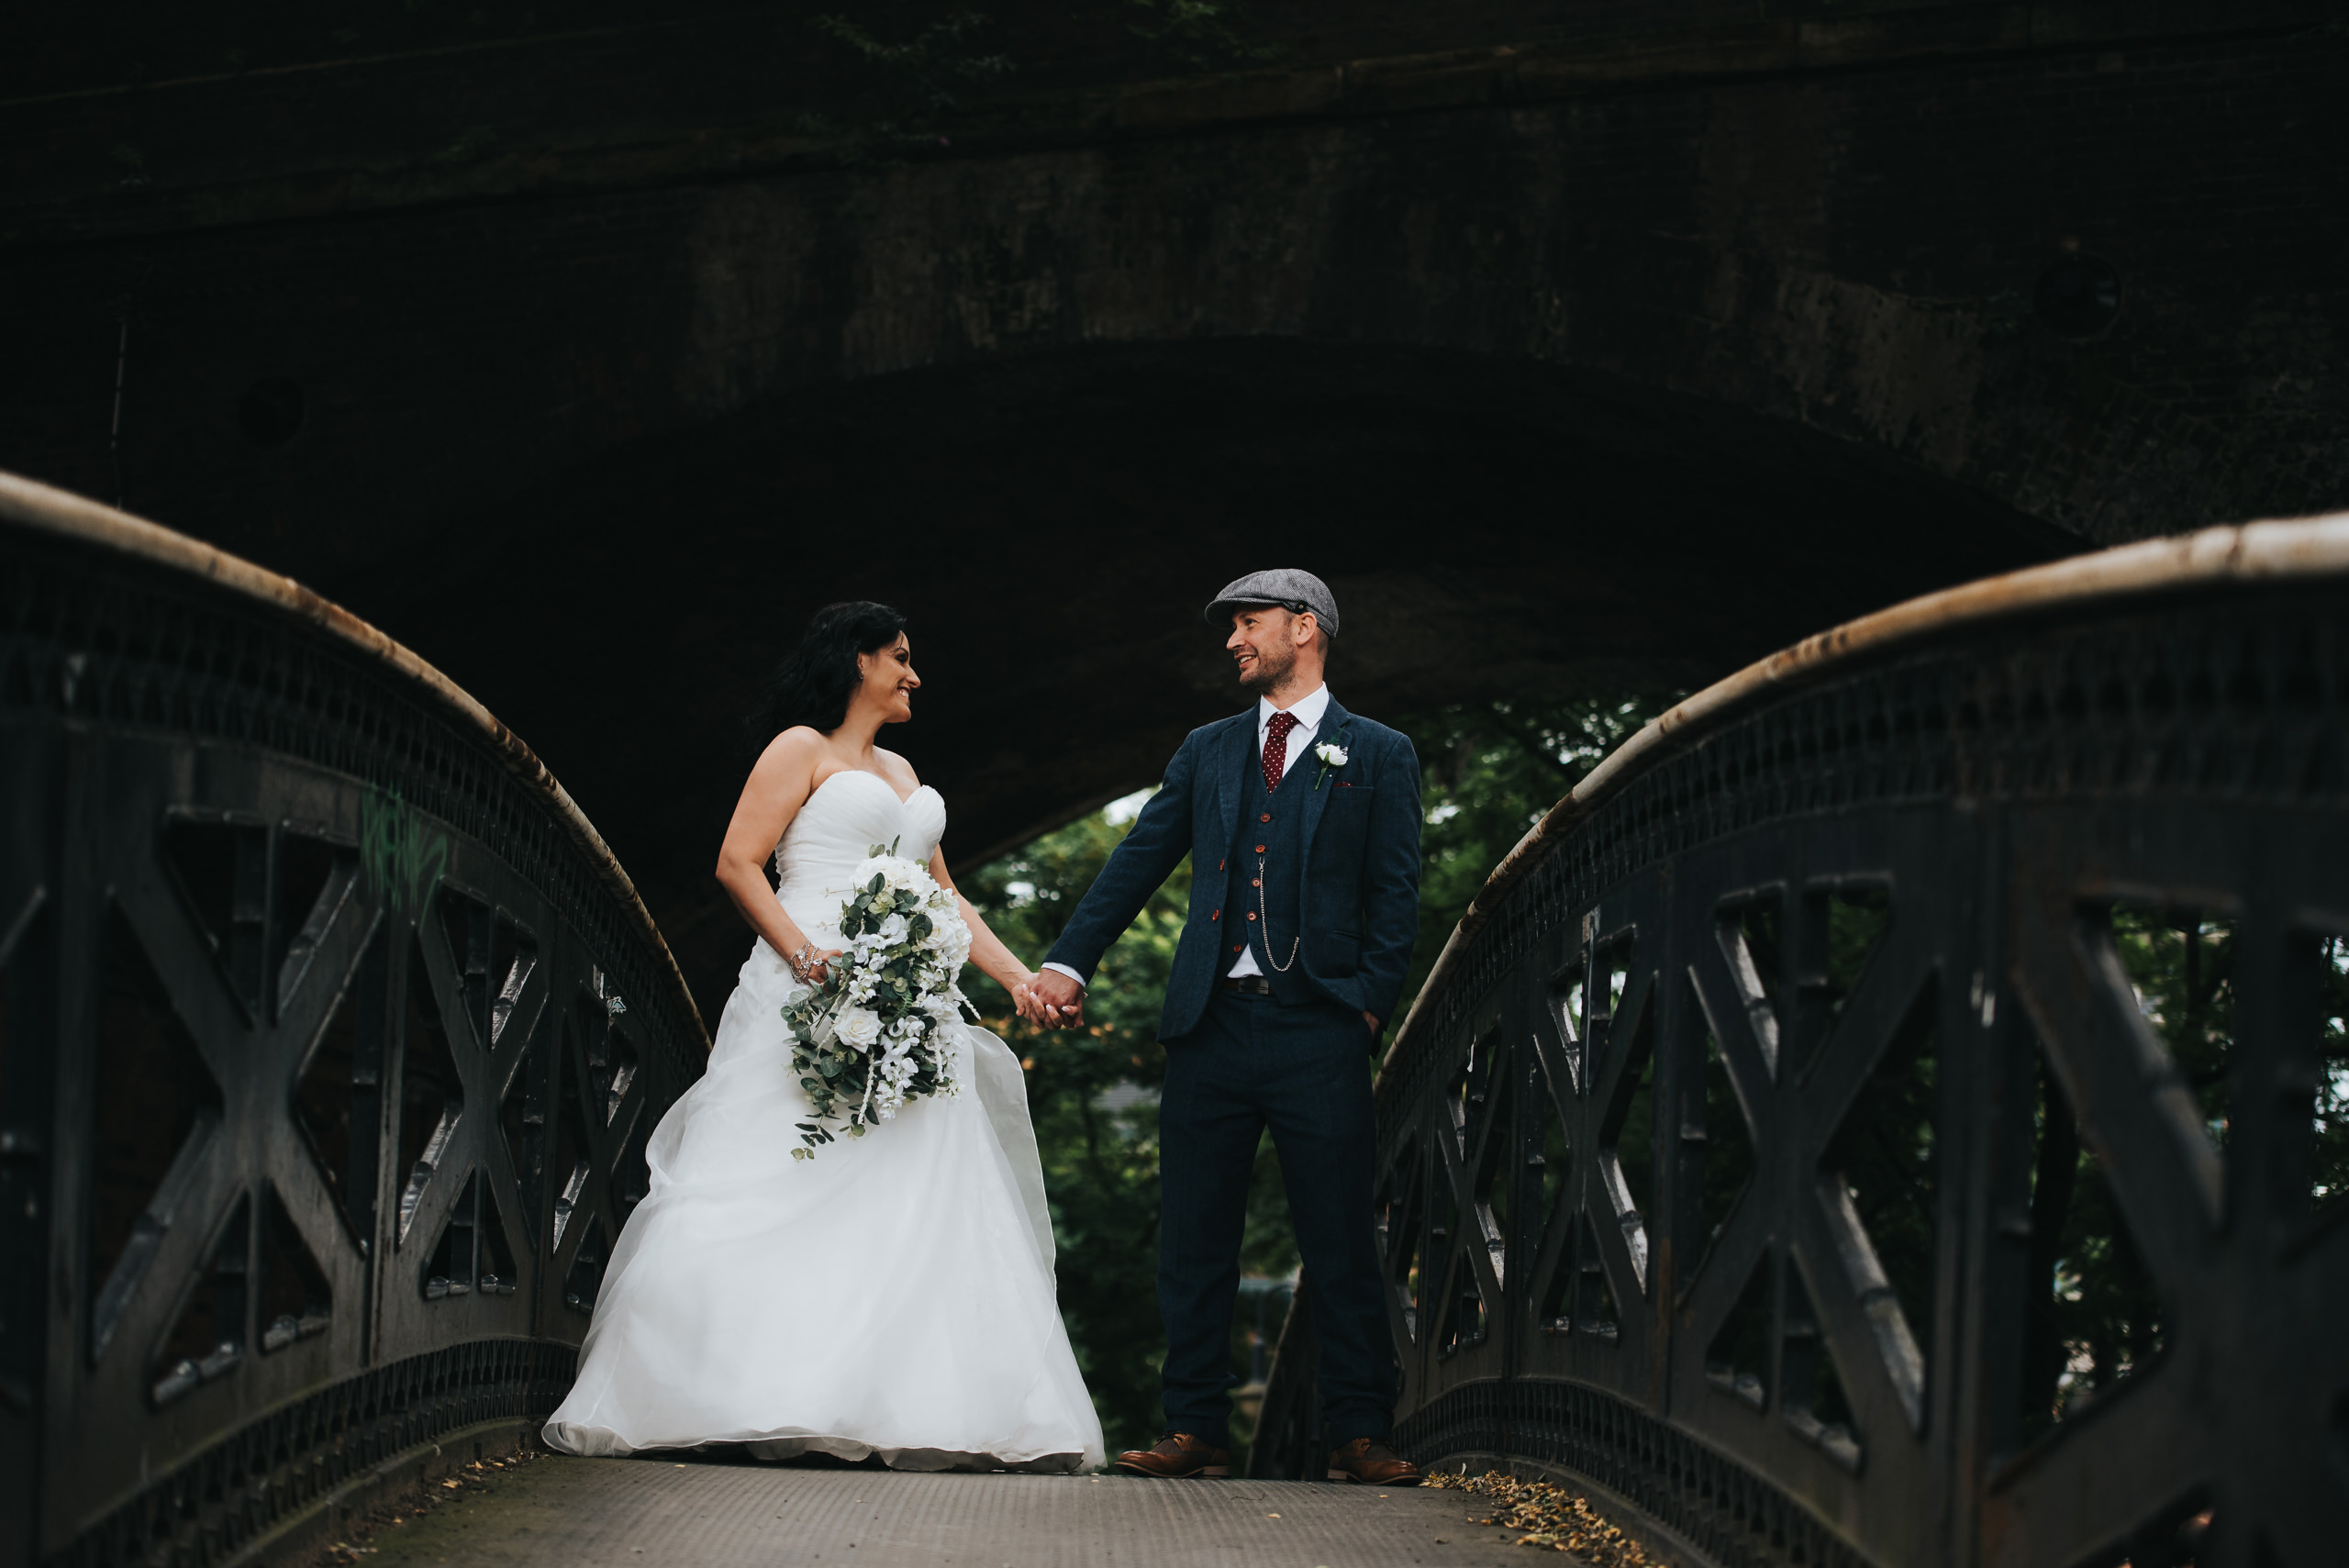 The Castlefield Rooms wedding photography Manchester 1 5 - CASTLEFIELD ROOMS WEDDING PHOTOGRAPHY – LIZ & PAUL 1